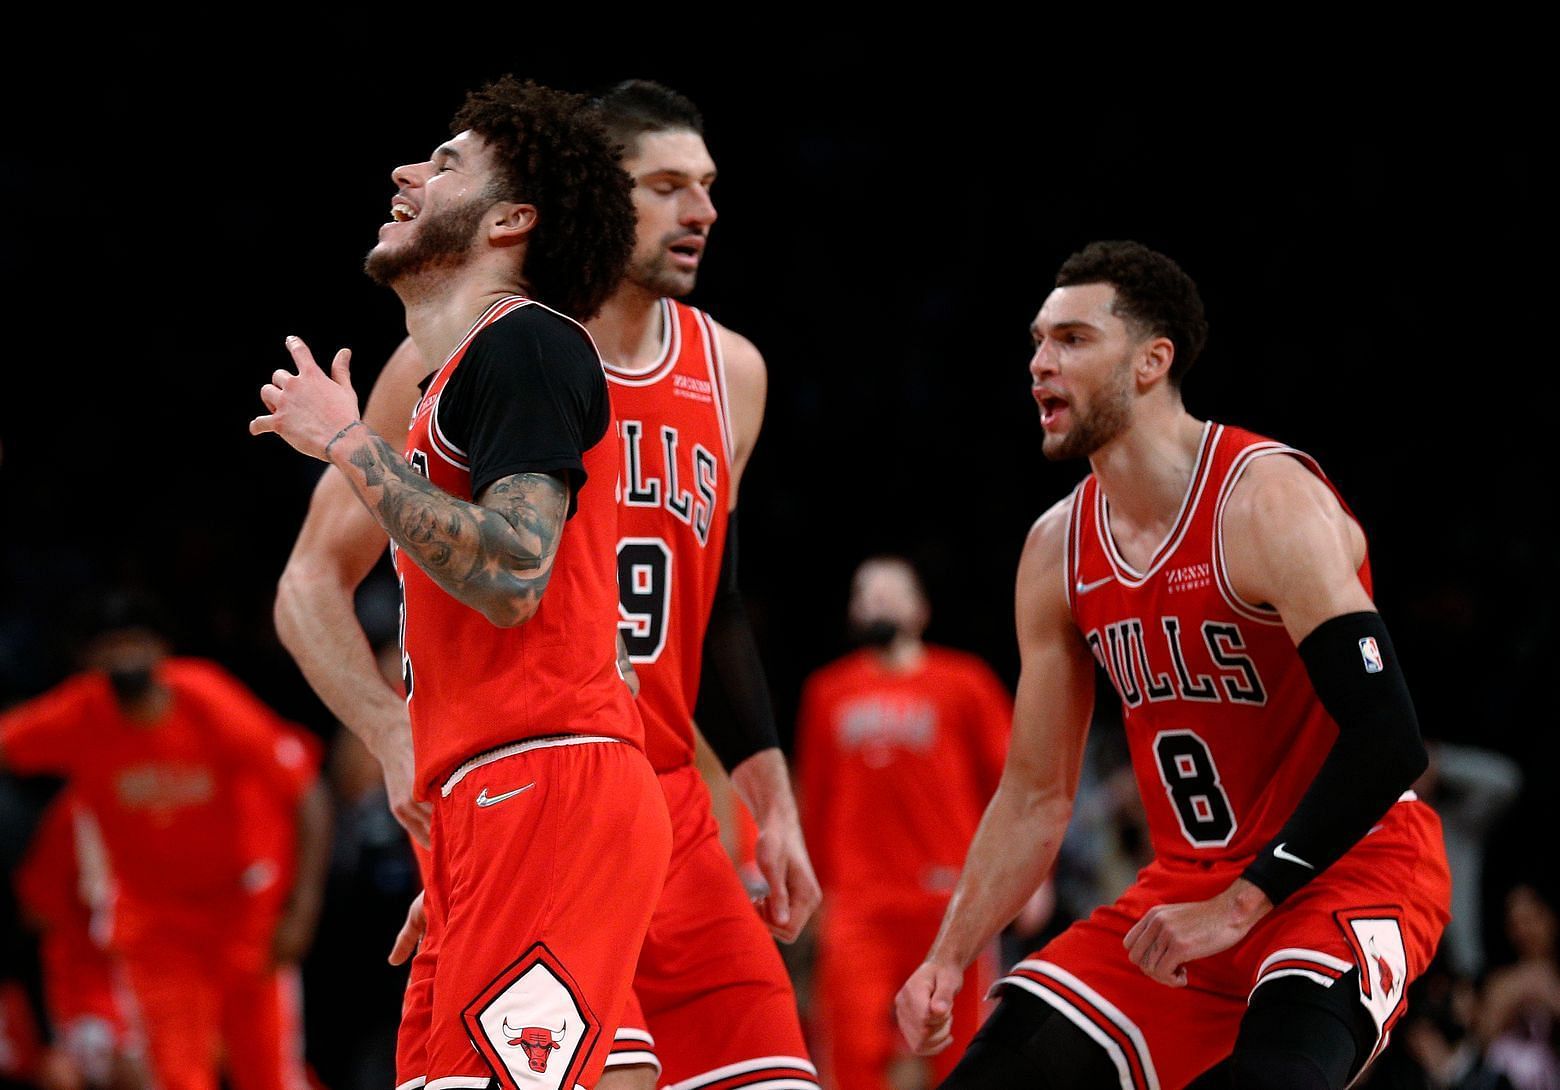 The Chicago Bulls have struggled badly against the elite teams in the NBA this season. [Photo: The Seattle Times]